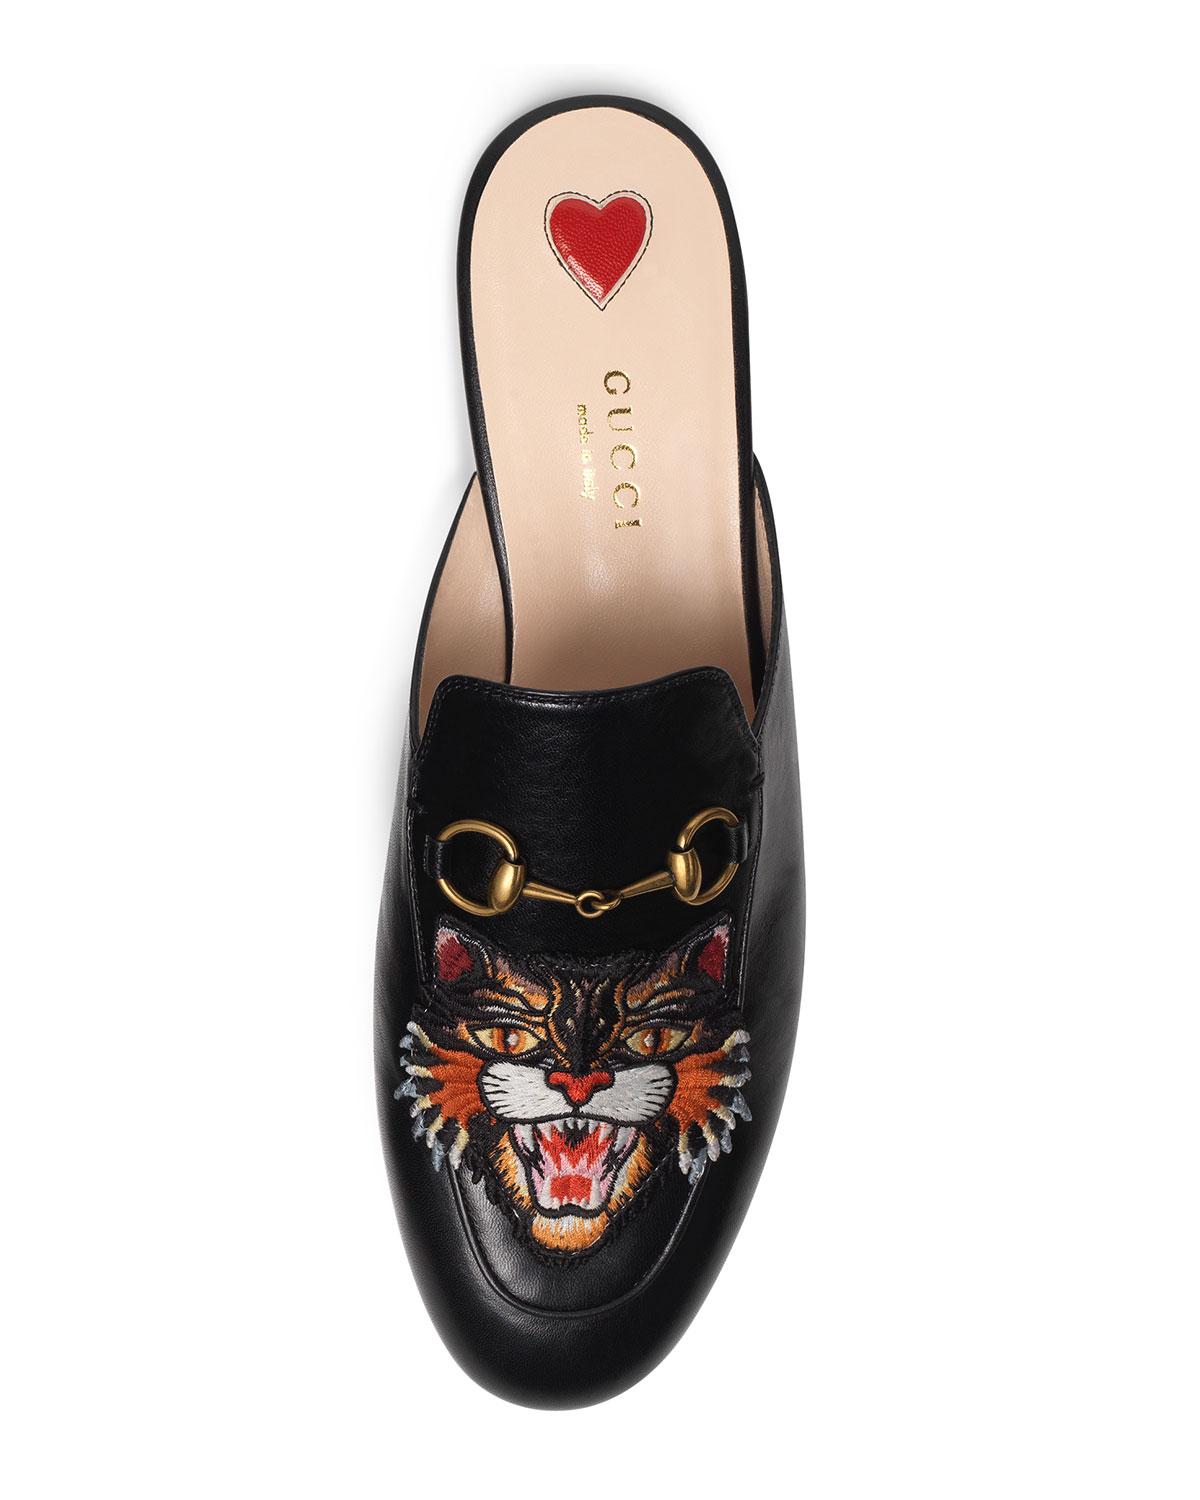 Gucci Leather Princetown Tiger-embroidered Loafer Mule in ...